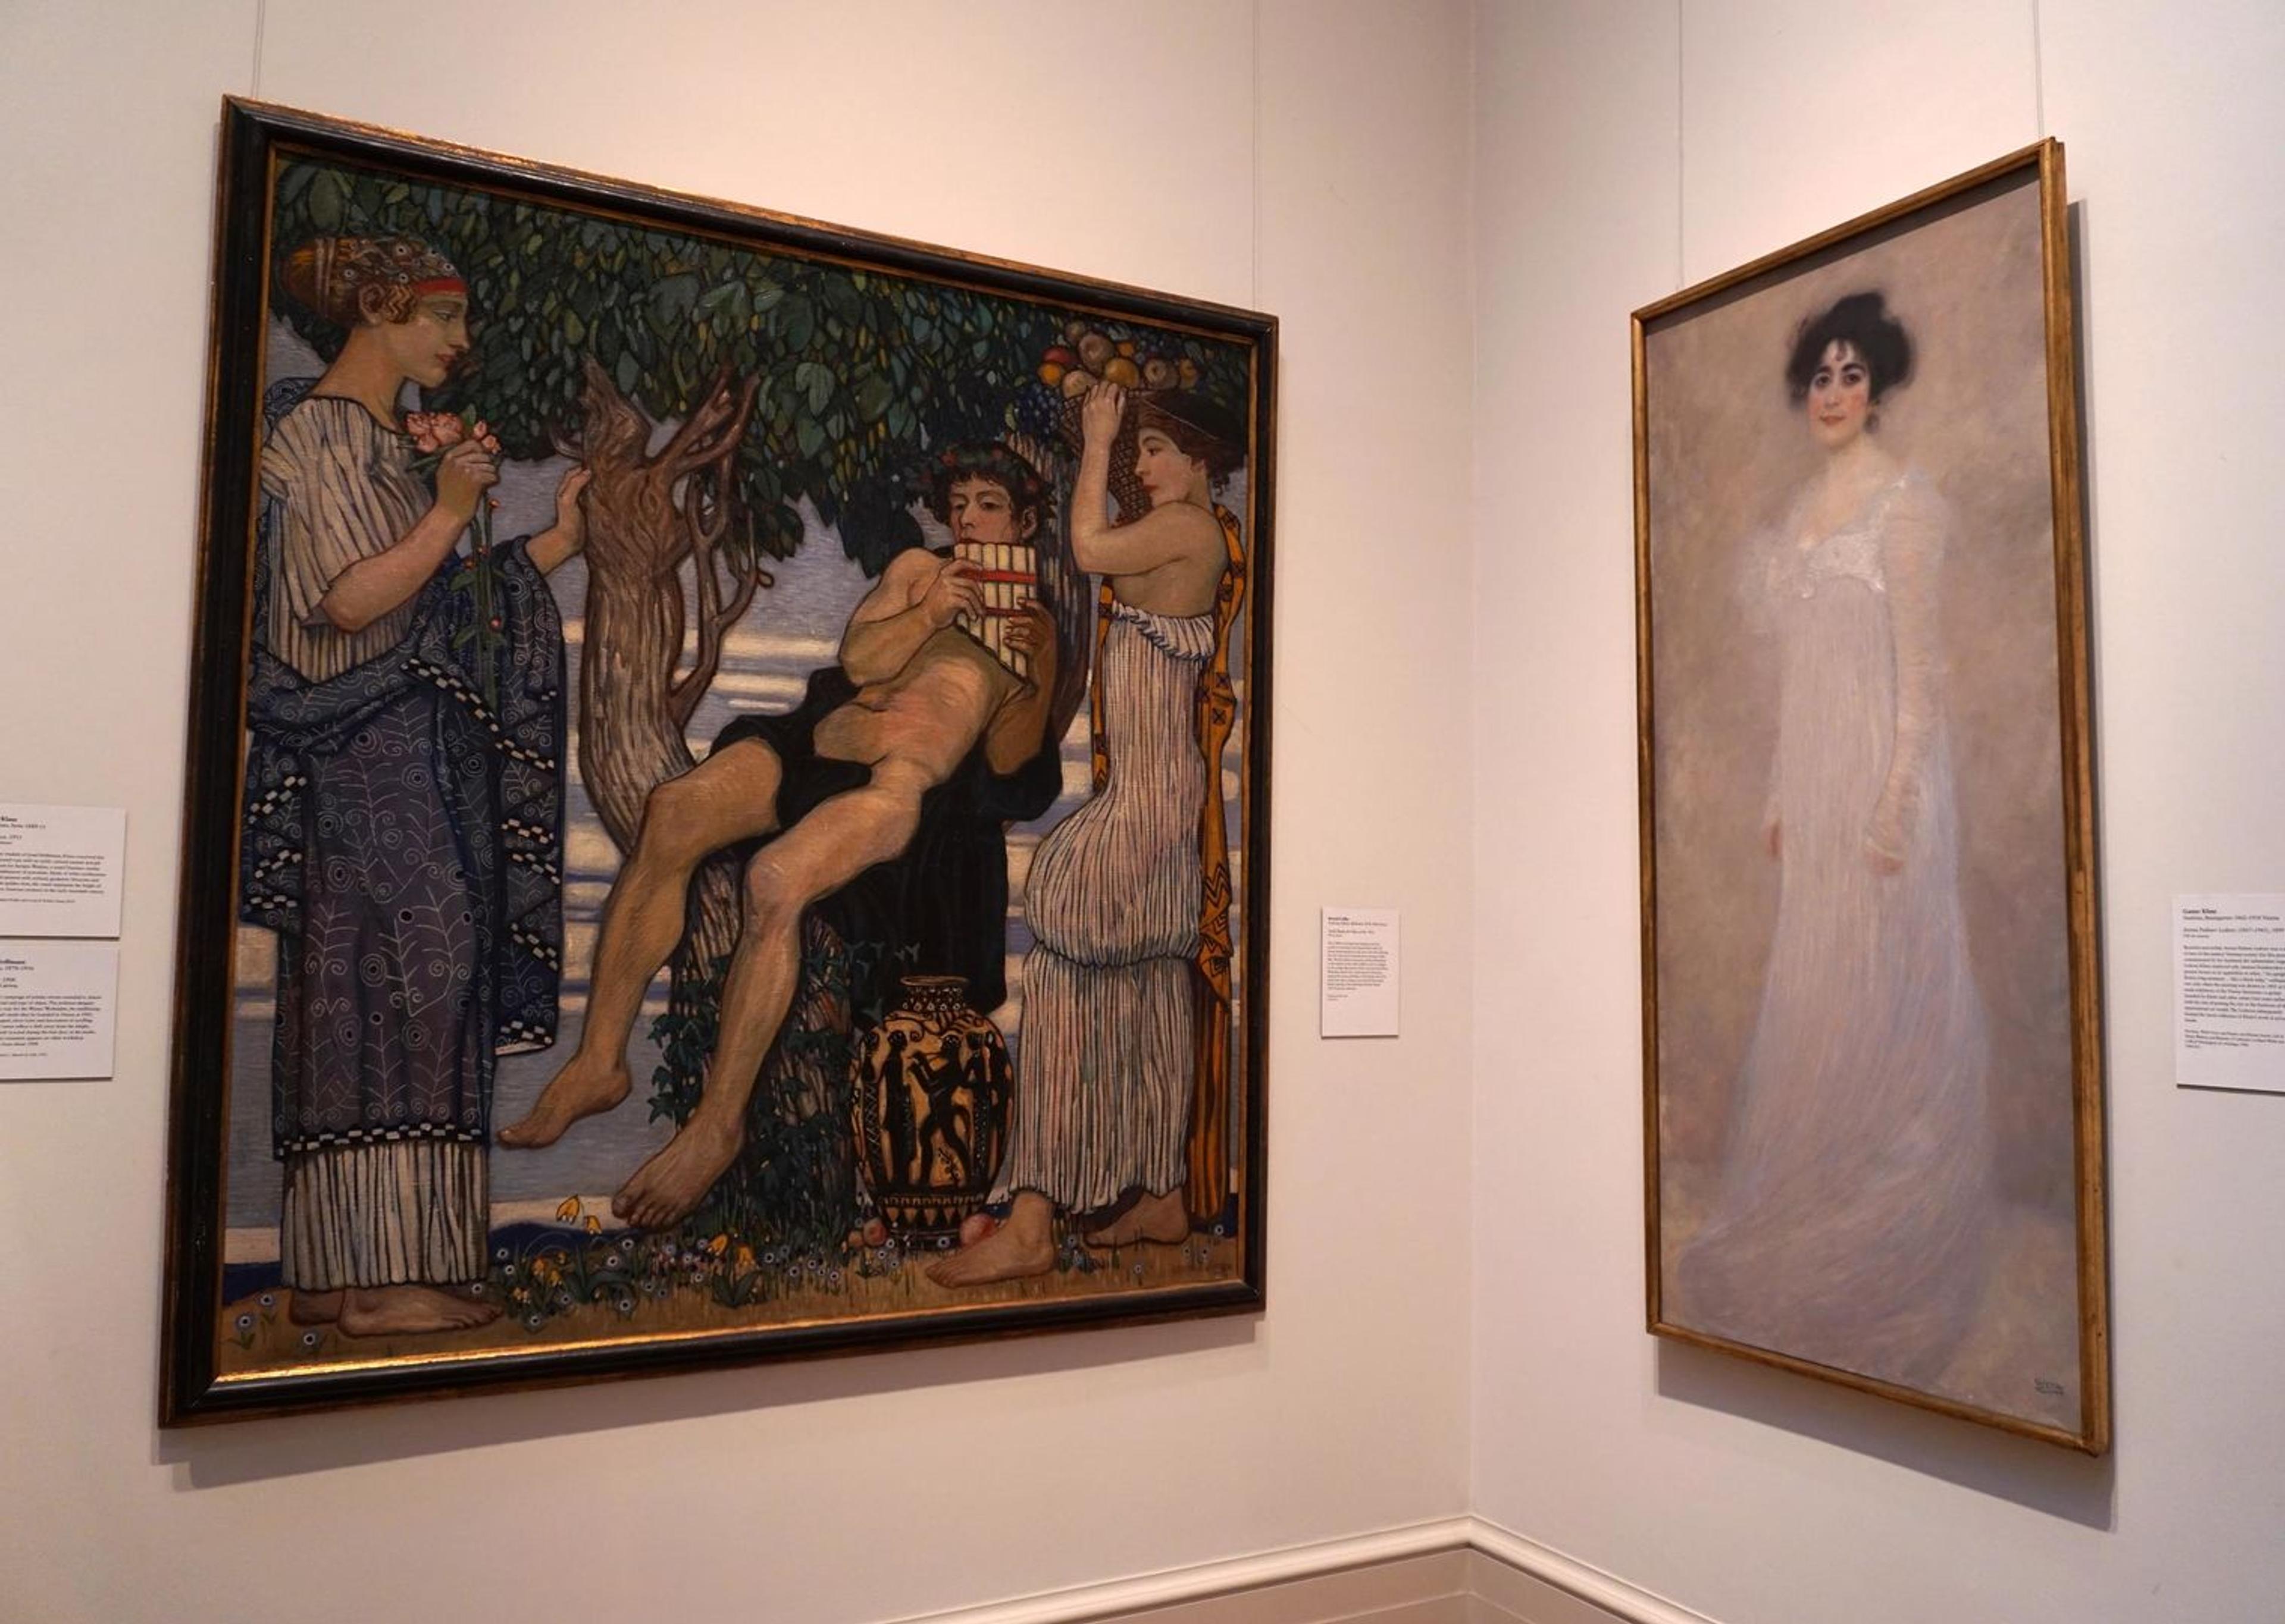 View of Bertold Löffler's "Youth Playing the Pipes of Pan" installed next to a Klimt portrait of a woman